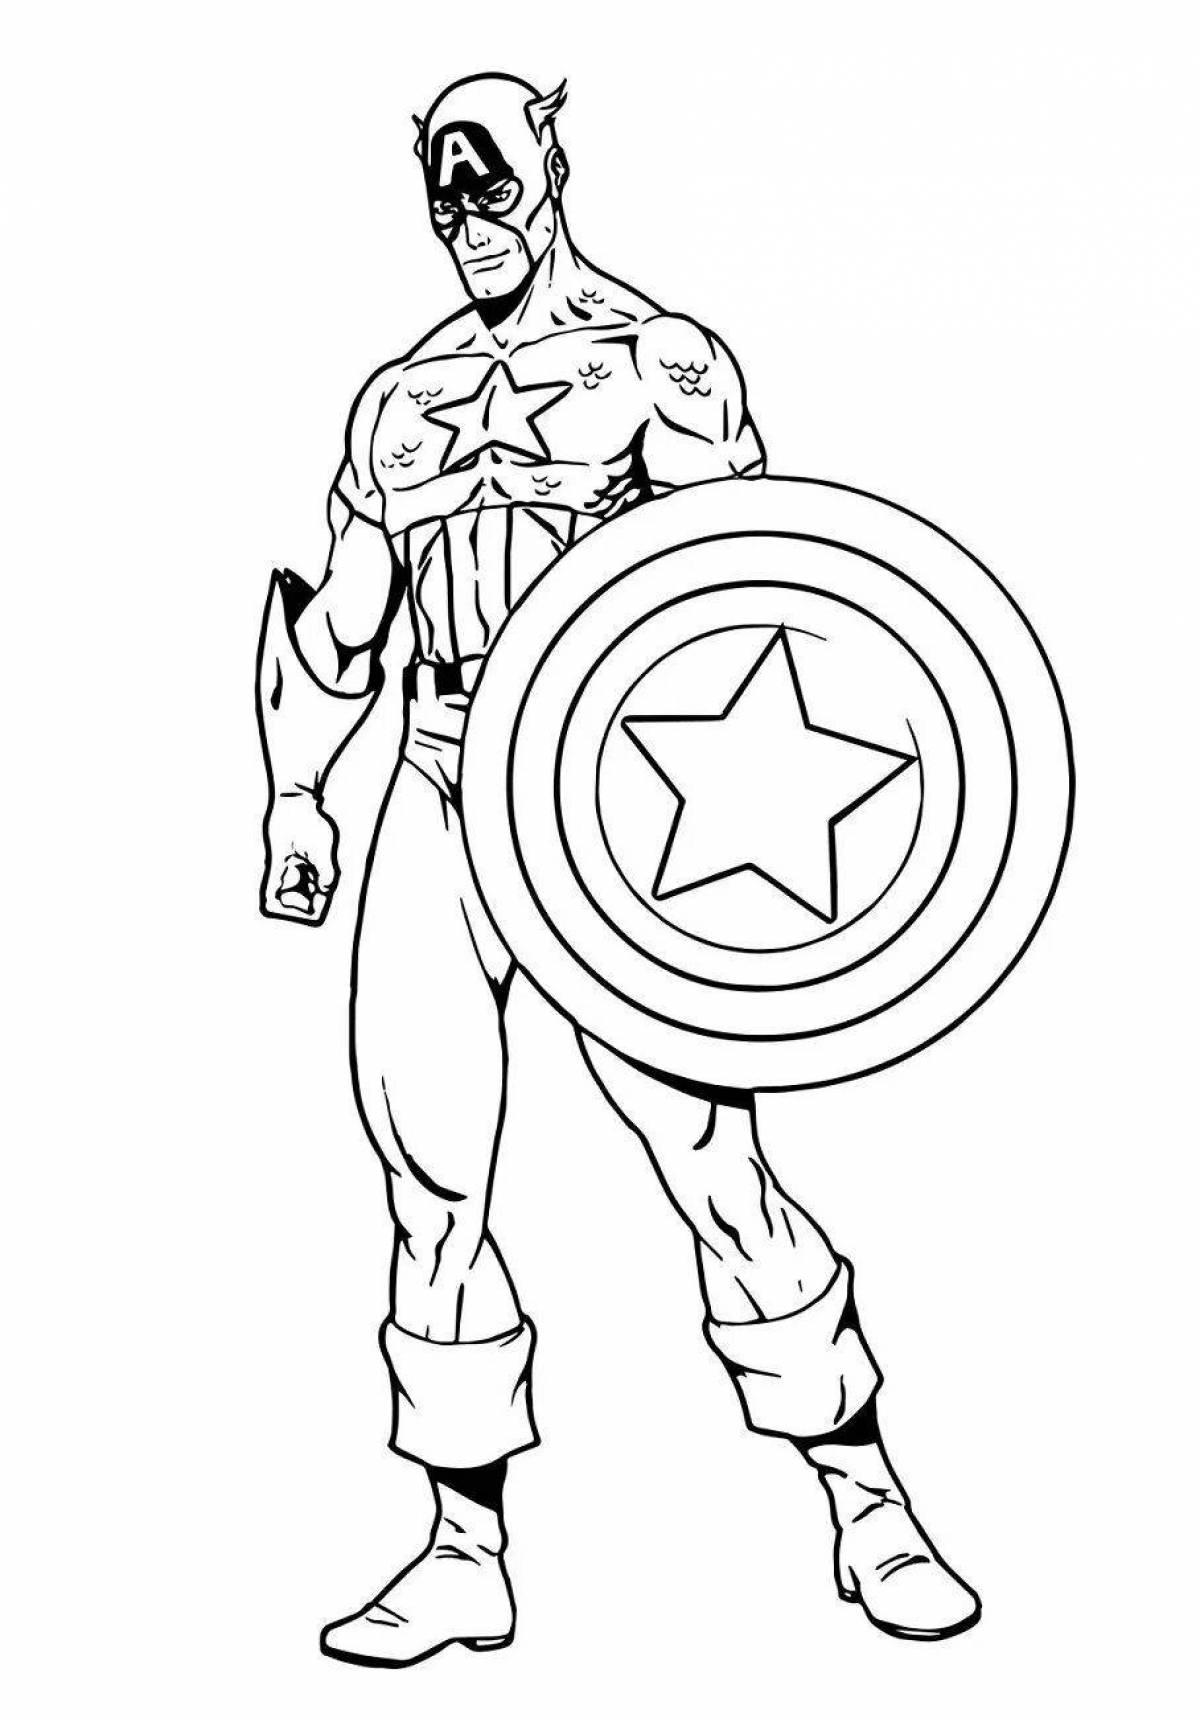 The amazing captain america coloring book for boys